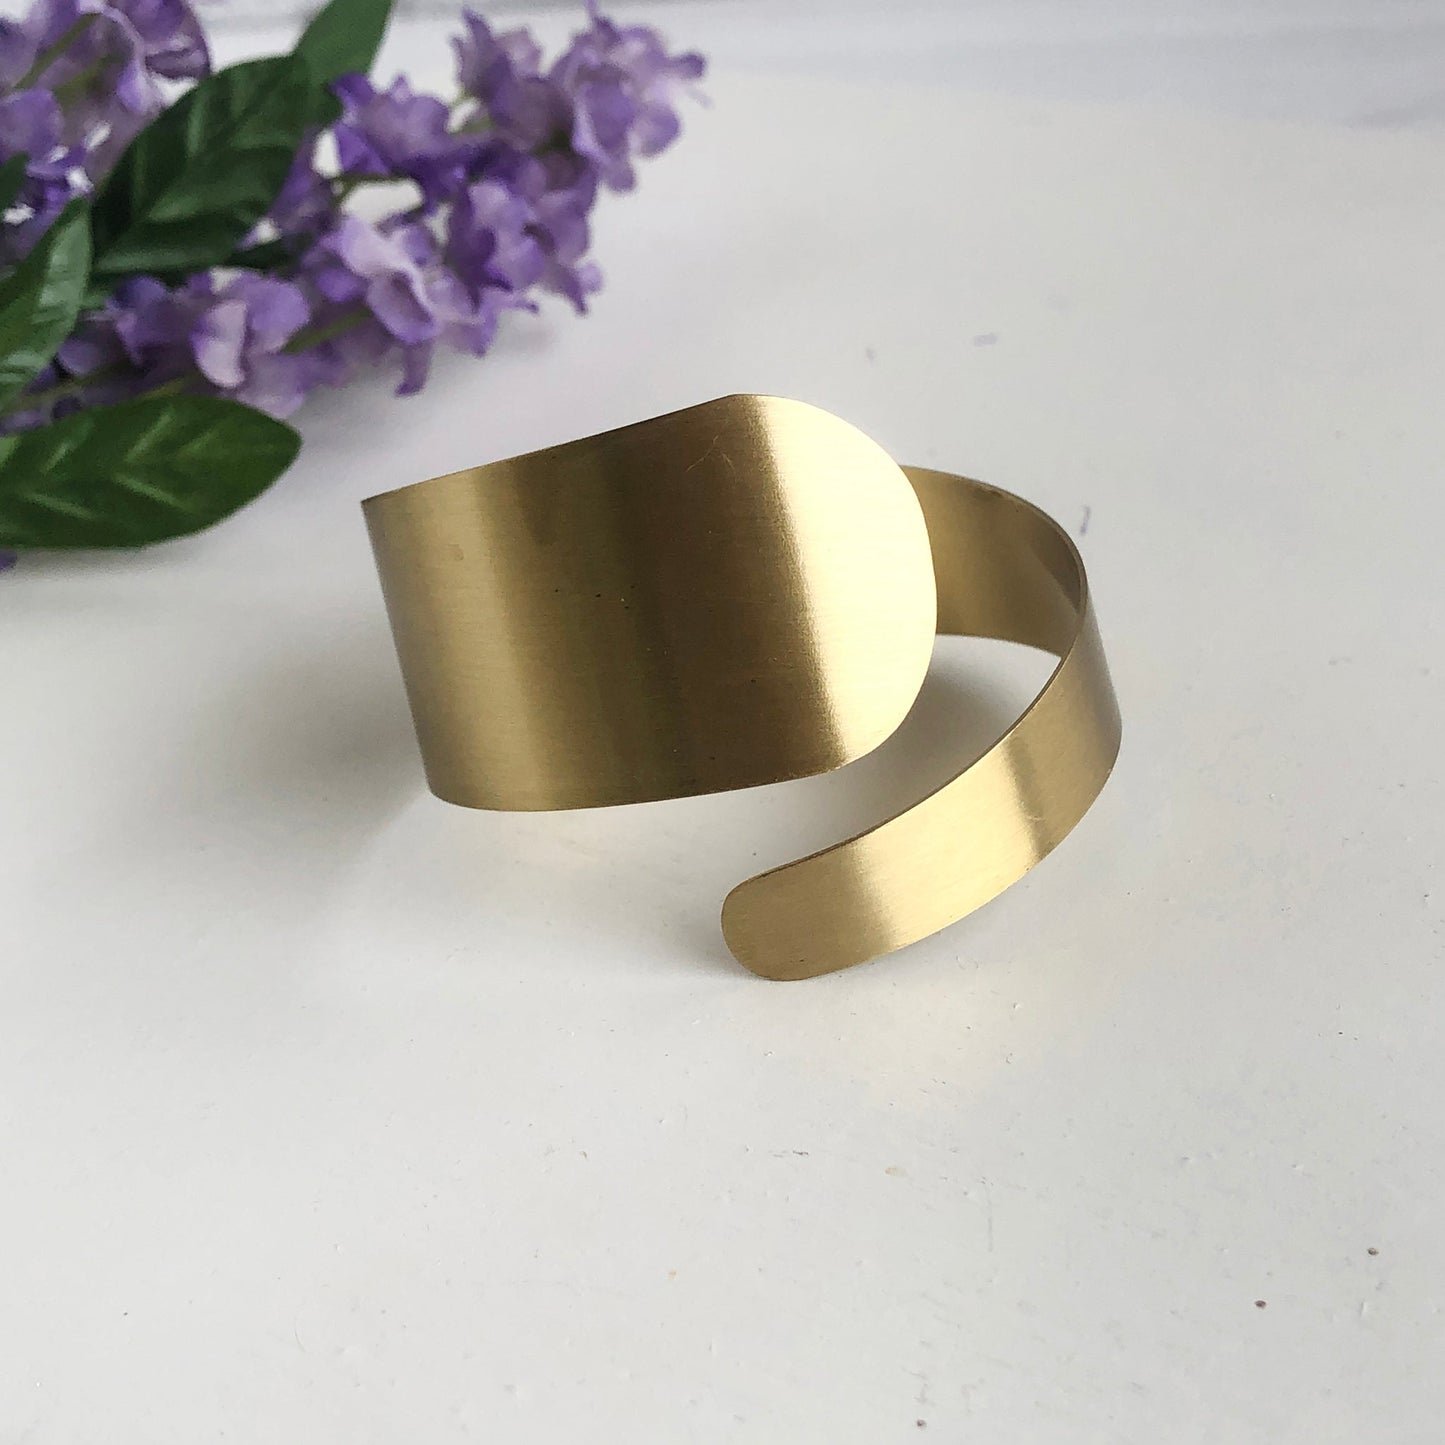 A gold spiral/swirl-inspired cuff bracelet is seen with a purple flower in the background.